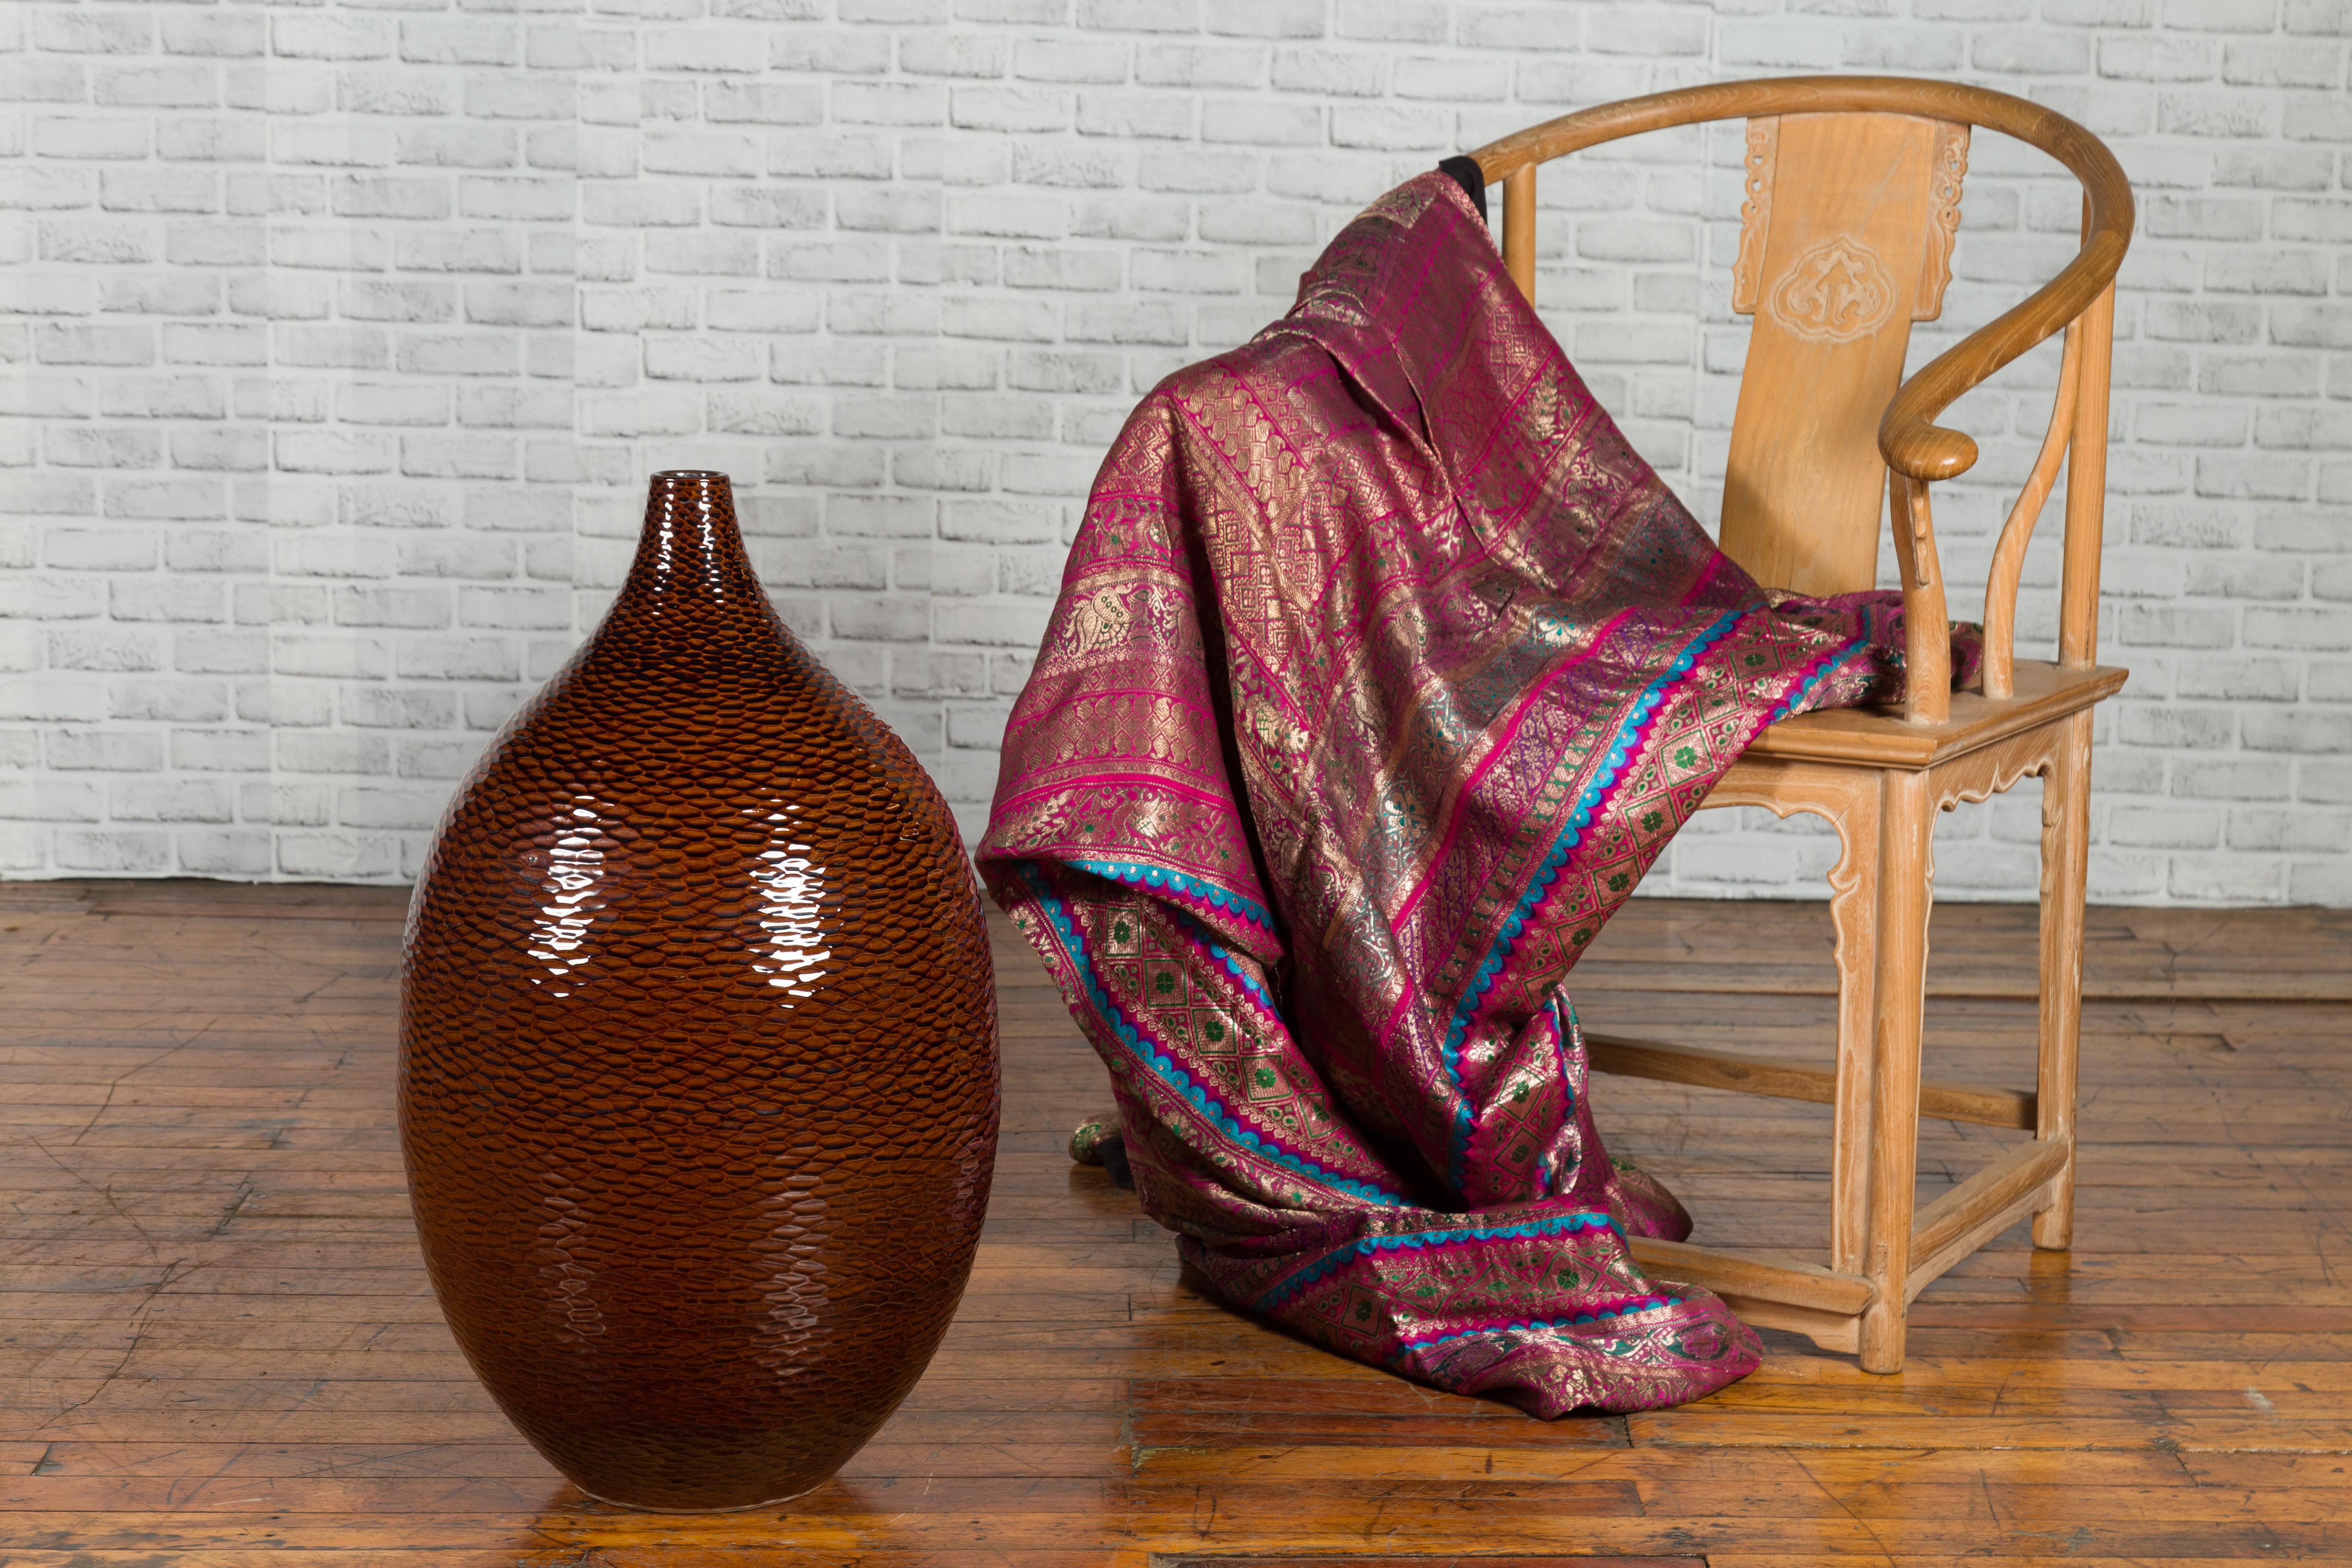 A Thai Chiang Mai brown textured vase from the Prem collection, with teardrop shape. We currently have two available, priced and sold $1,200 each. Created in Chiang Mai, Northern Thailand during the 20th century, this Prem collection vase features a